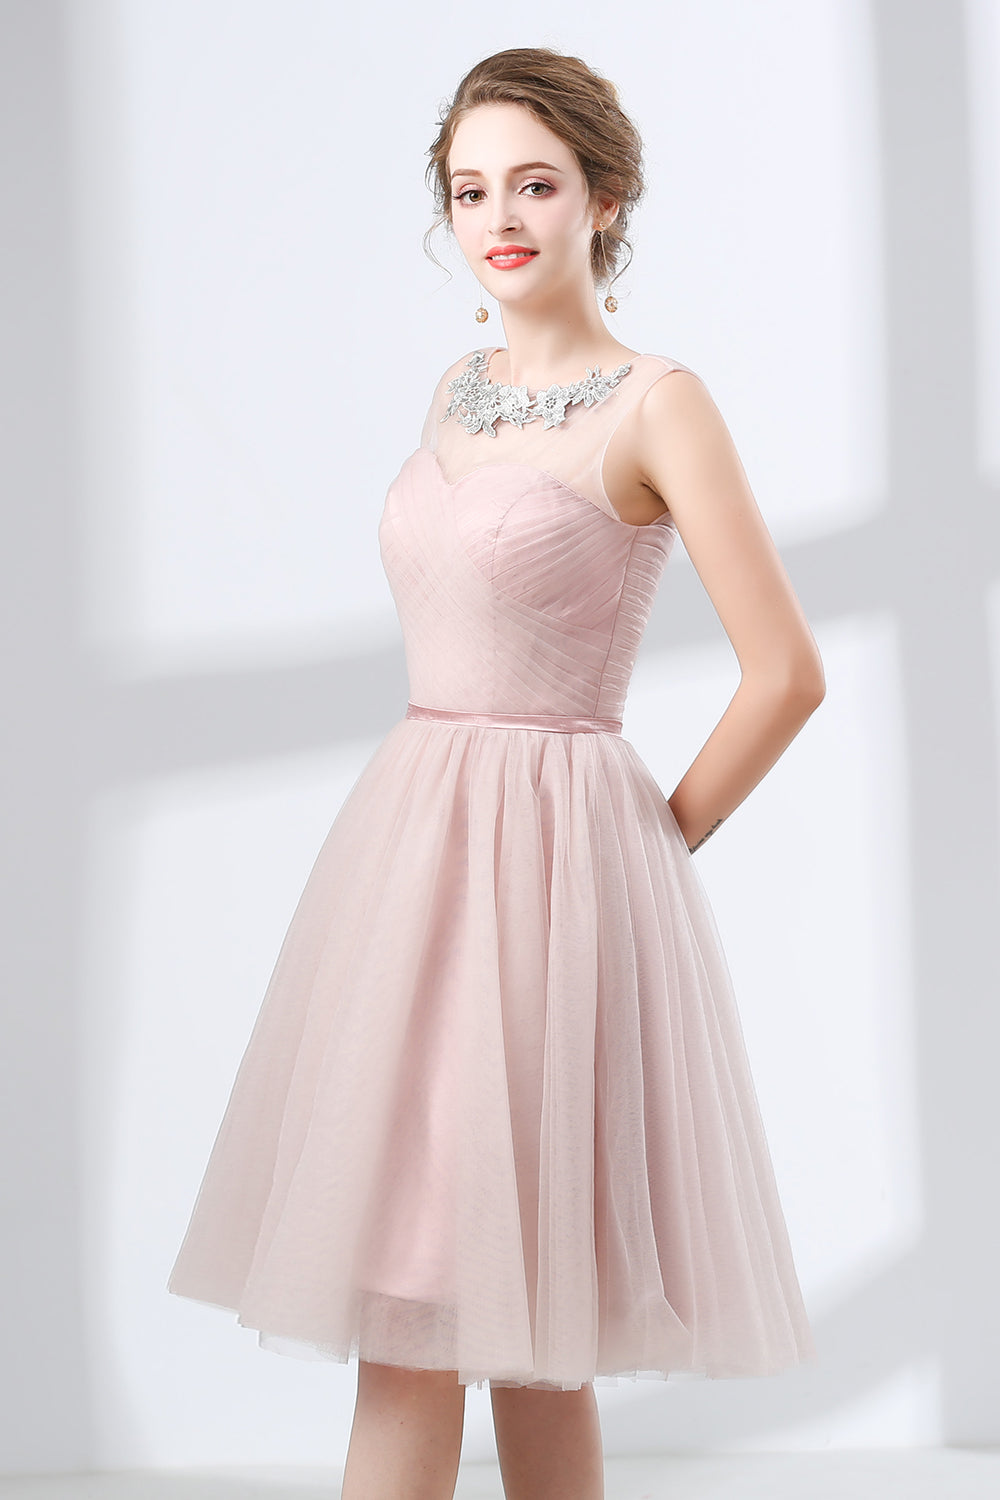 Modest Prom Dress, A-Line Pink Tulle Lace Pleats Knee Length Homecoming Dresses